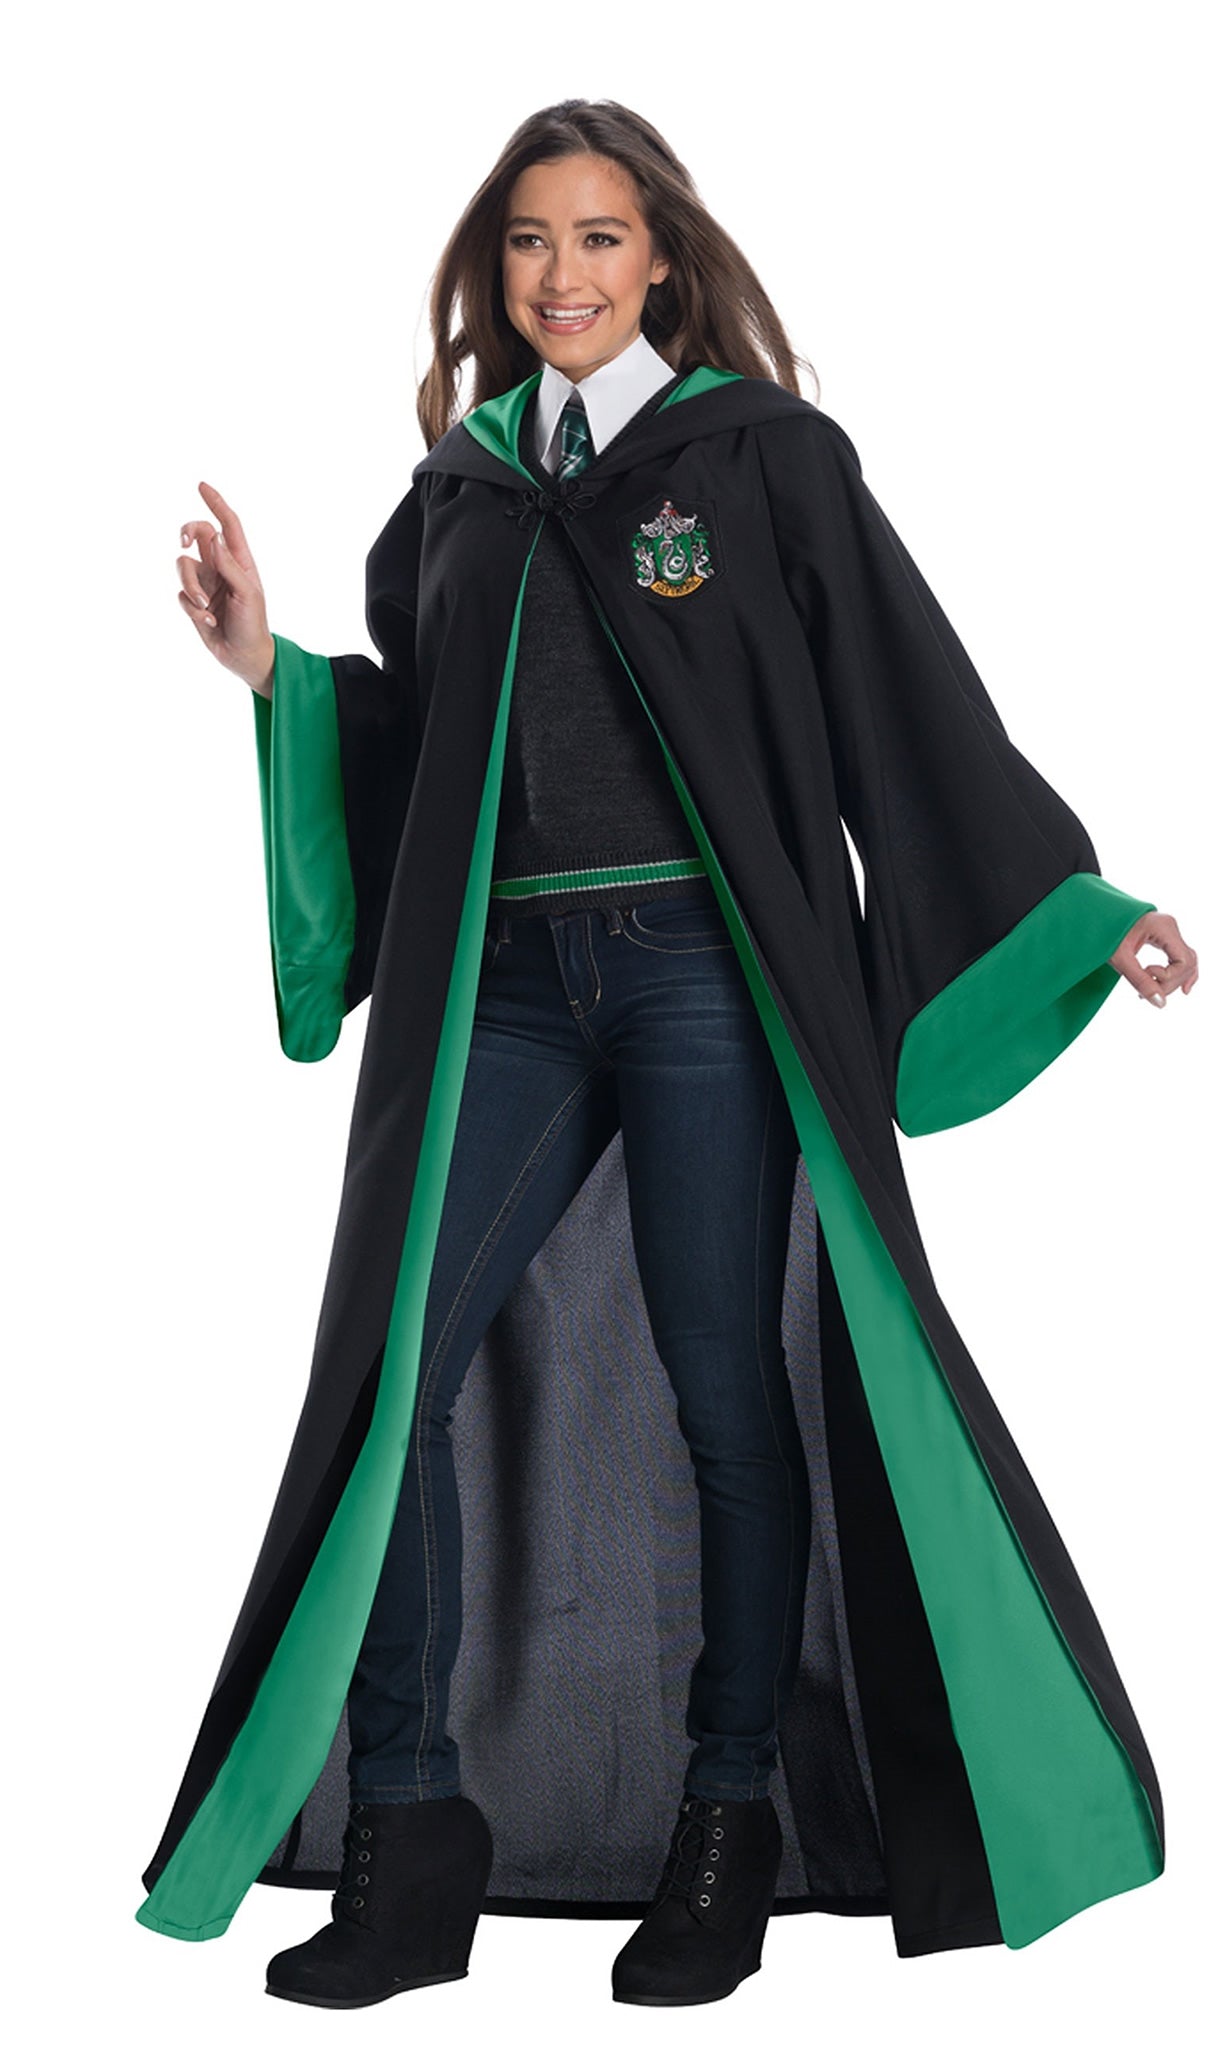 Slytherin Student Harry Potter – Party Dudes